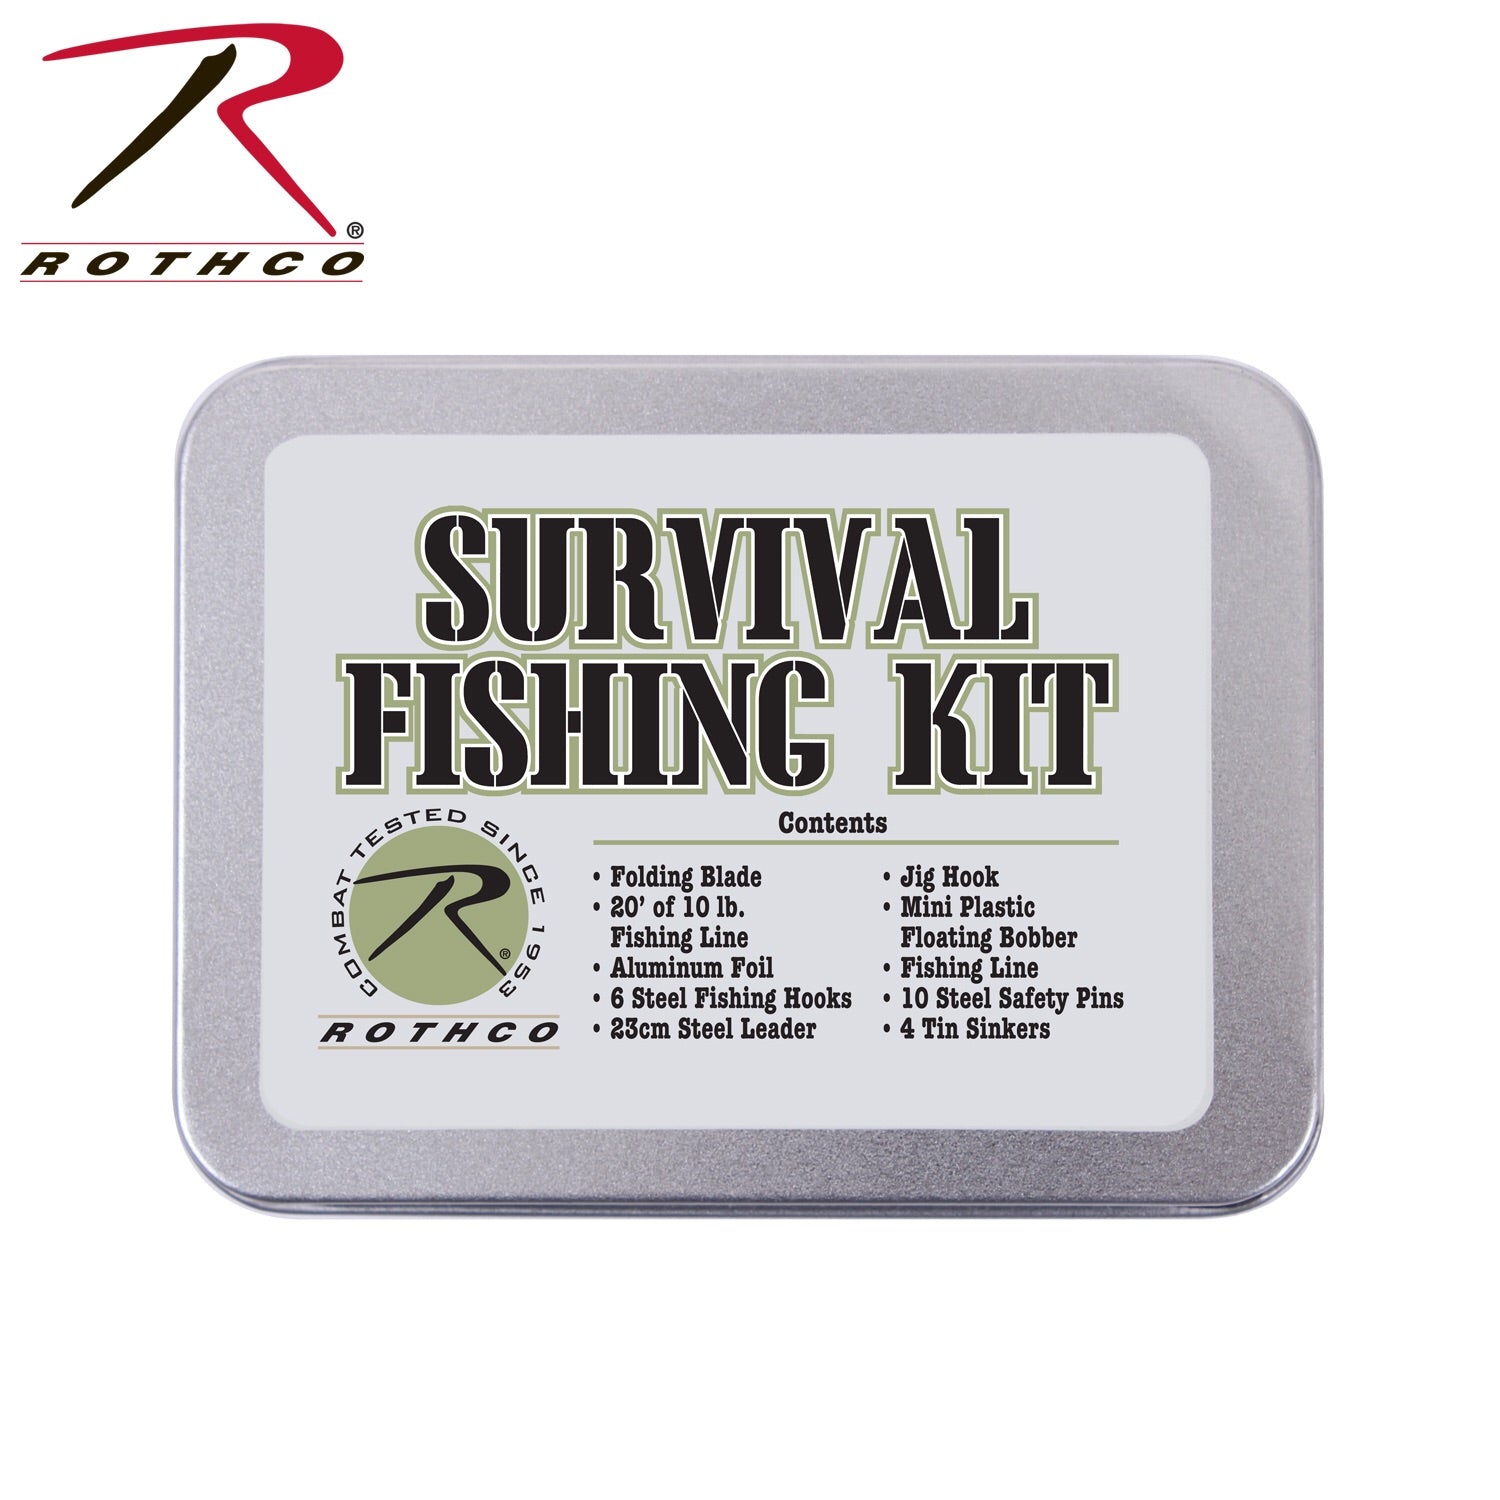 Rothco Survival Fishing Kit, Redwood Sole